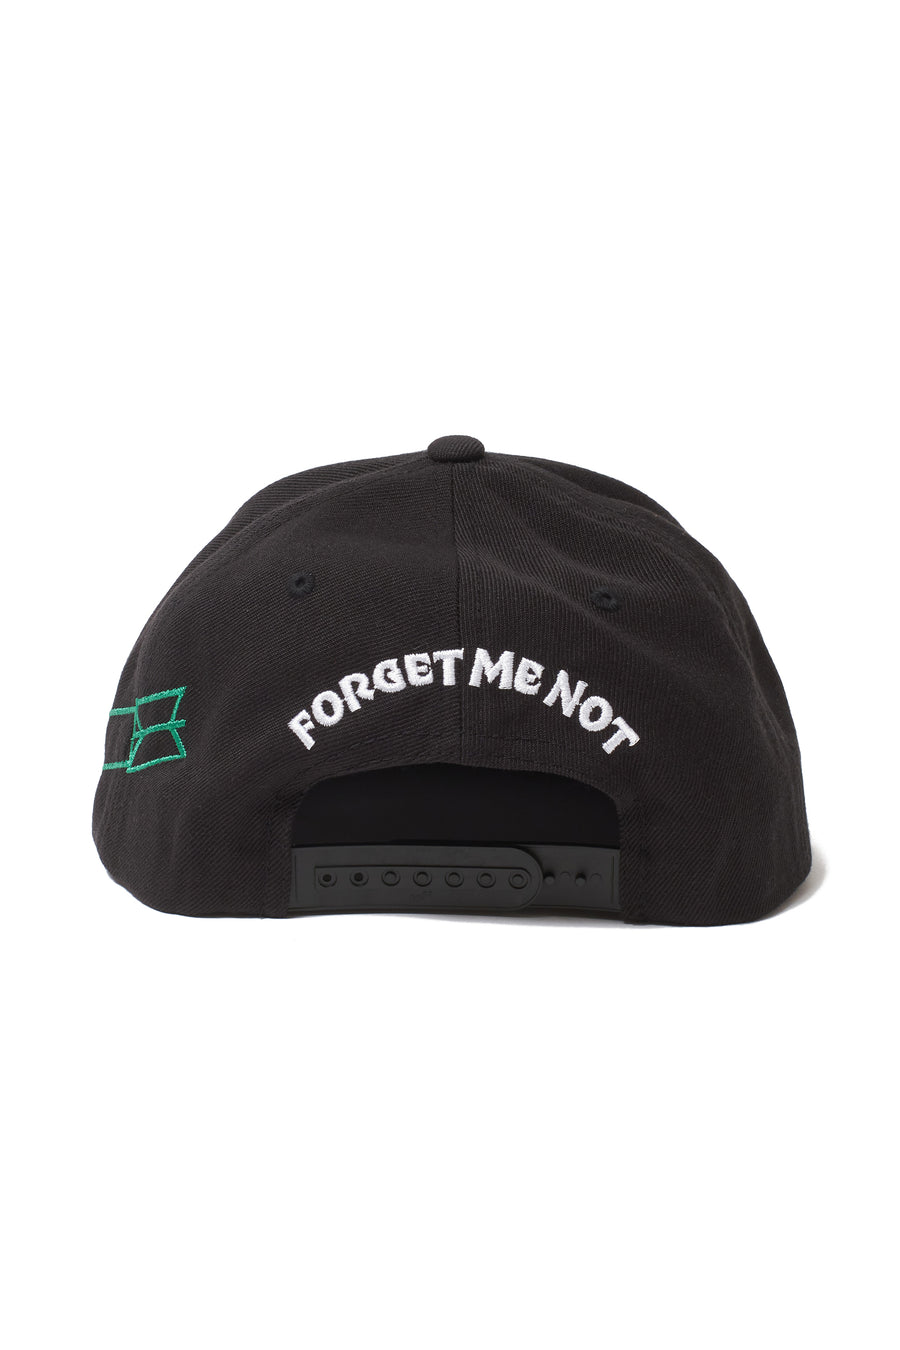 【WEB LIMITED】MAYO RAT FORGET ME NOT Embroidery CAP - BLACK